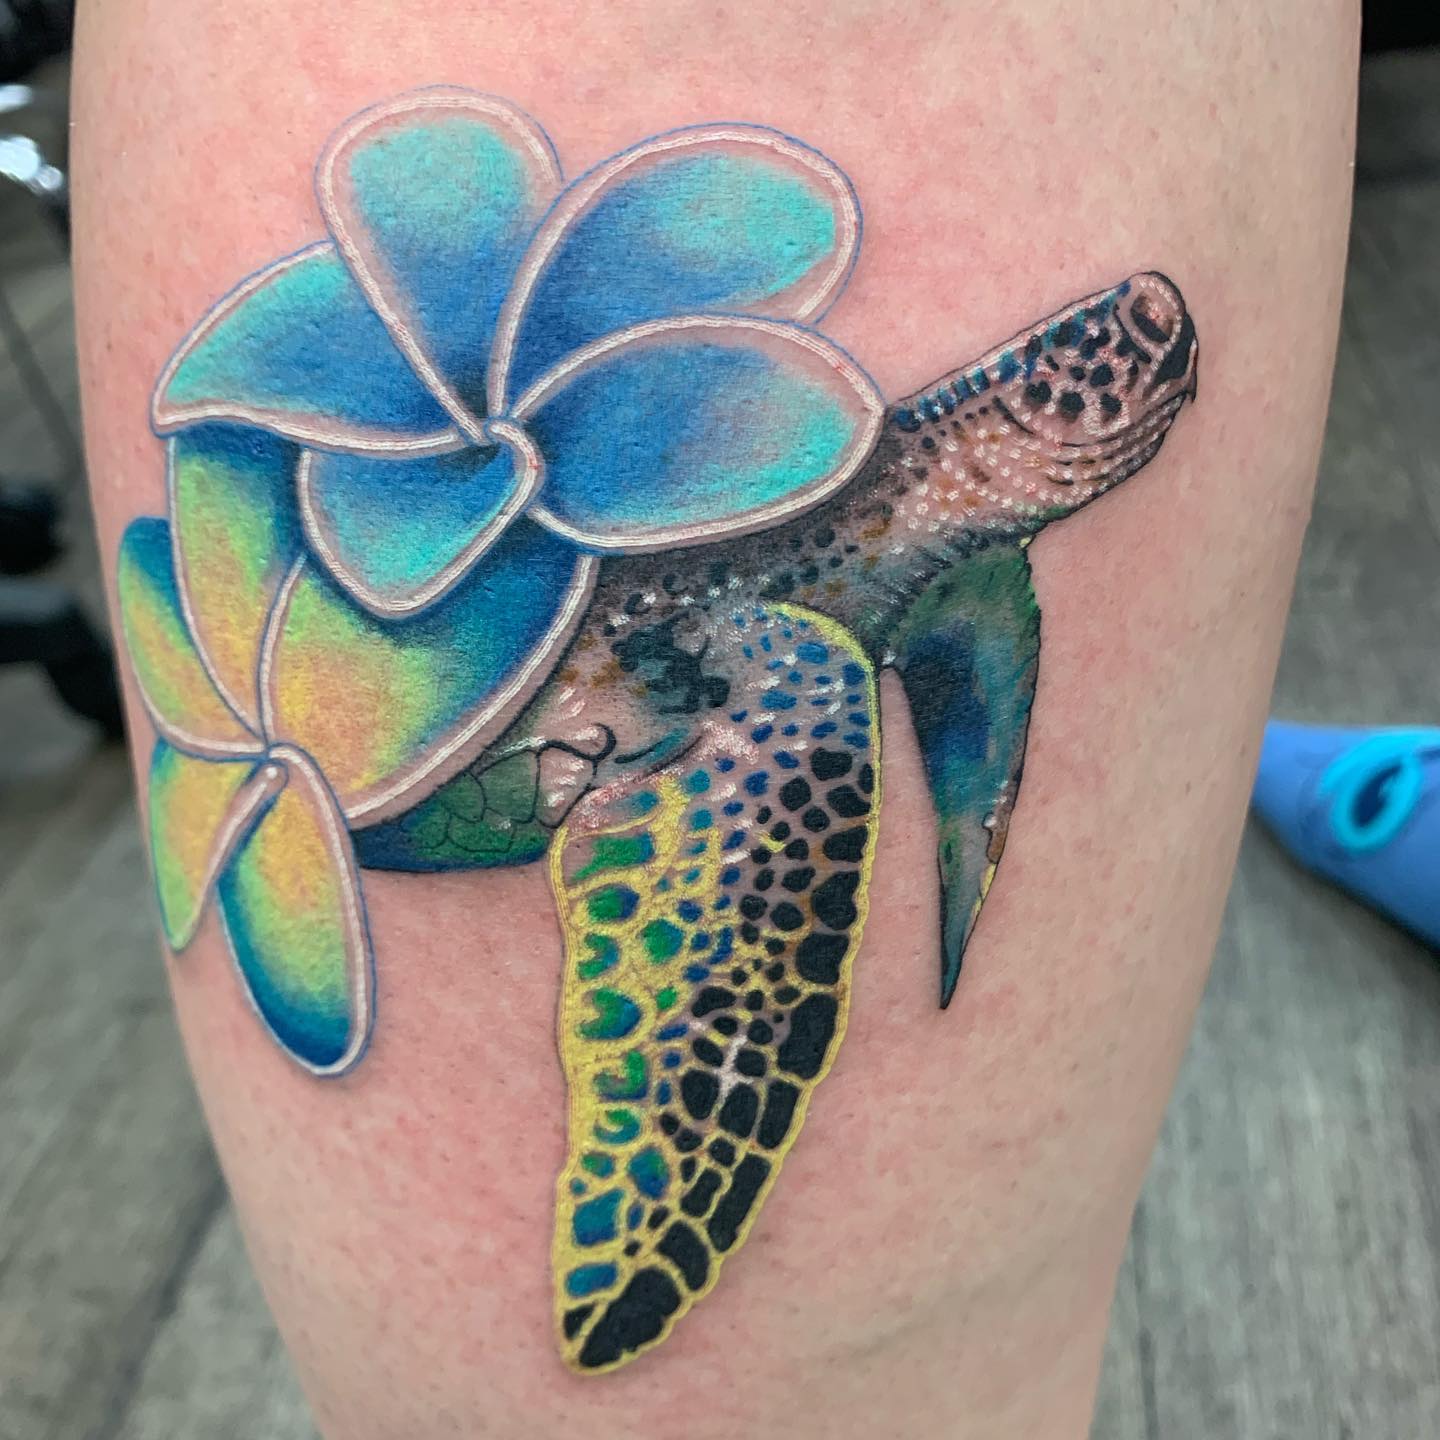 This is so pretty! I love the combination of the flower shell and the sea turtle. It looks like the shell is coming out of her back, which makes it look like she's emerging from it.